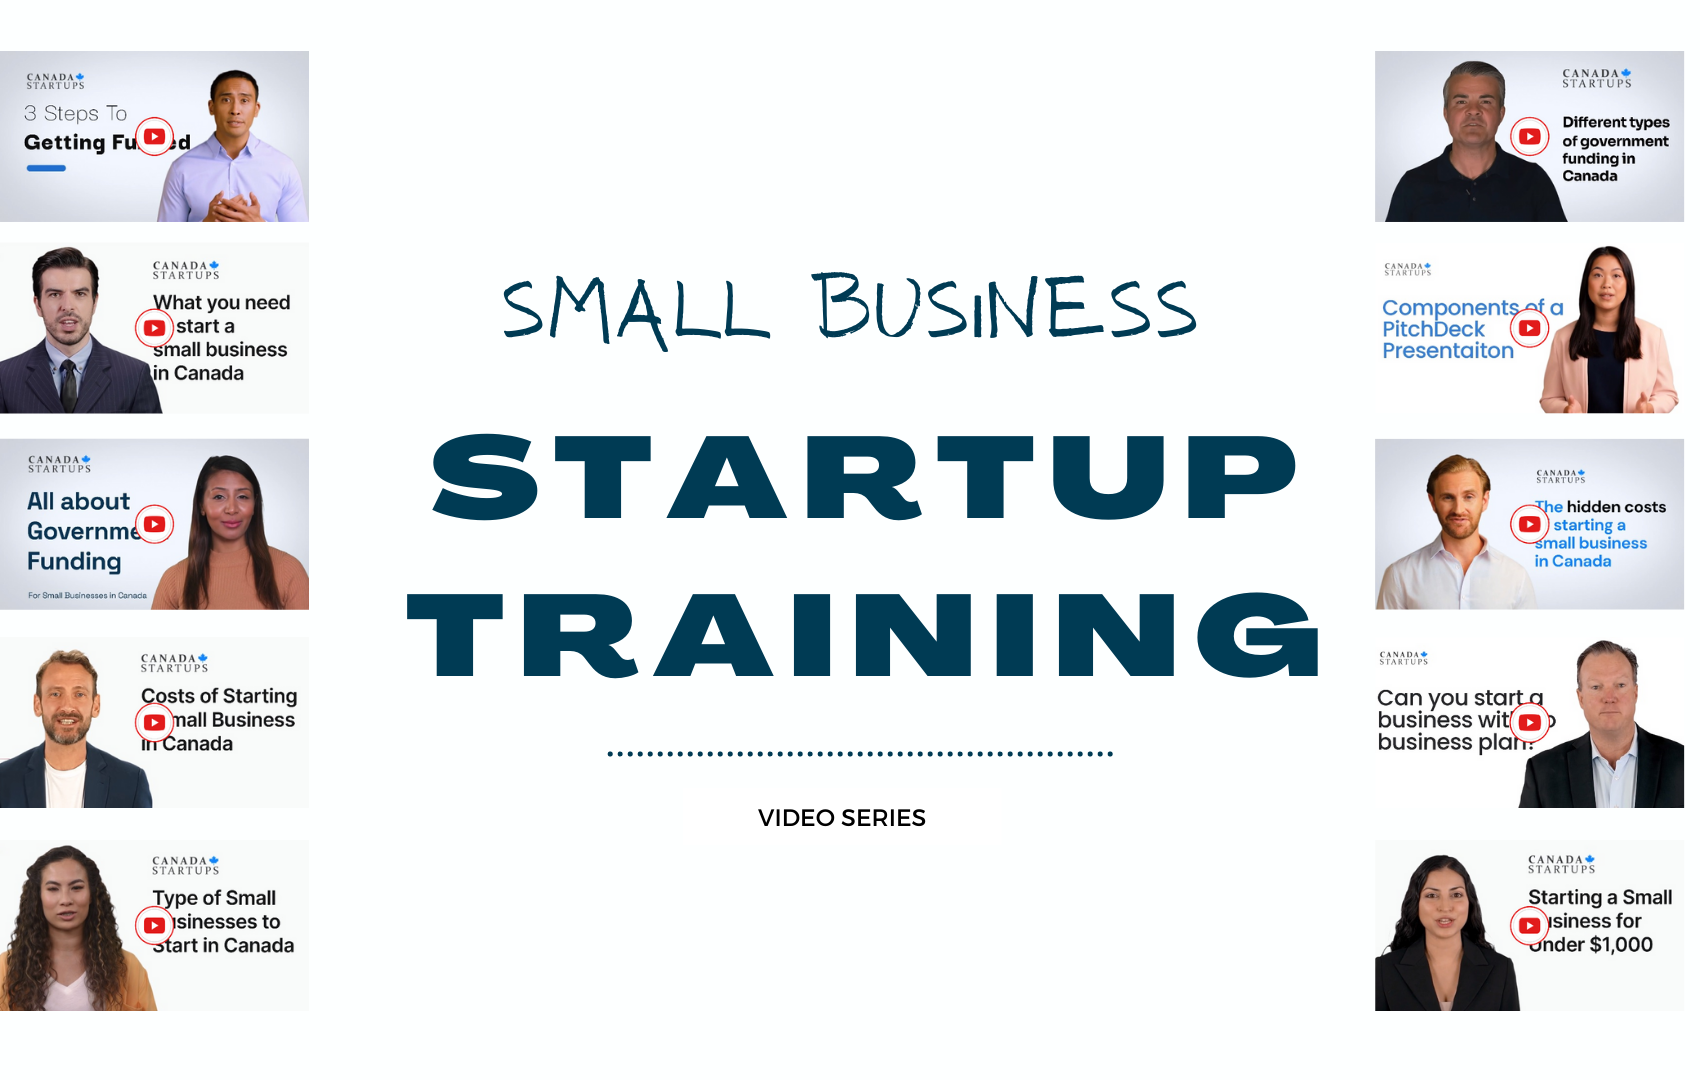 Small Business Startup Training Video Series